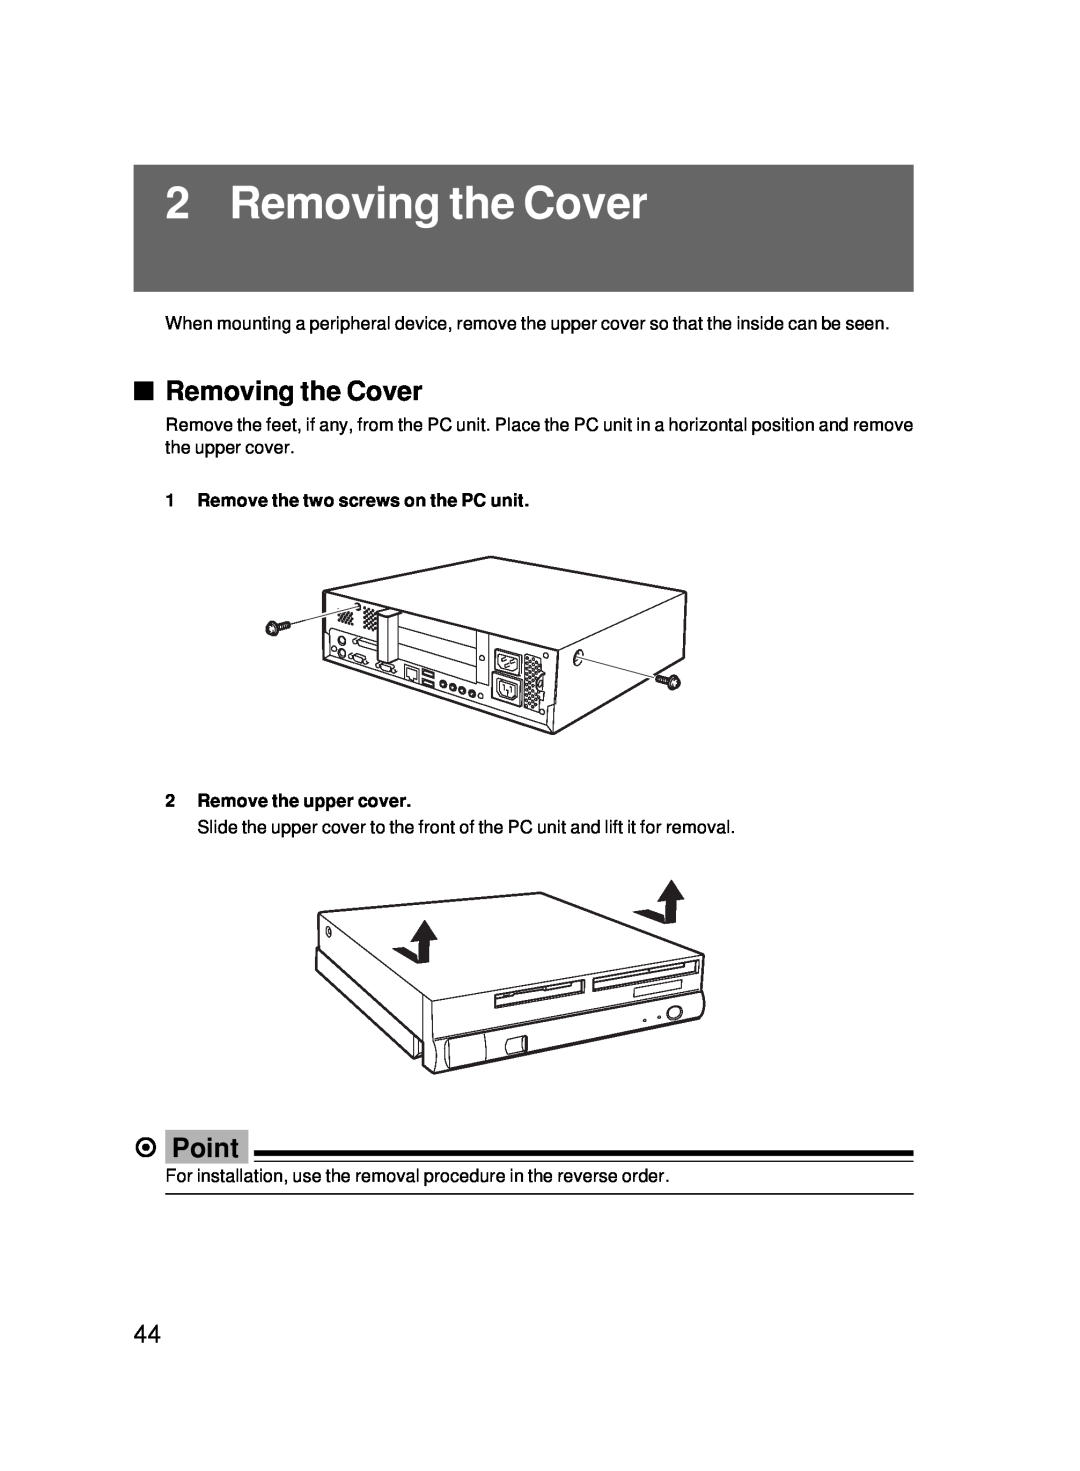 Fujitsu 5000 user manual Removing the Cover, Point, Remove the two screws on the PC unit 2 Remove the upper cover 